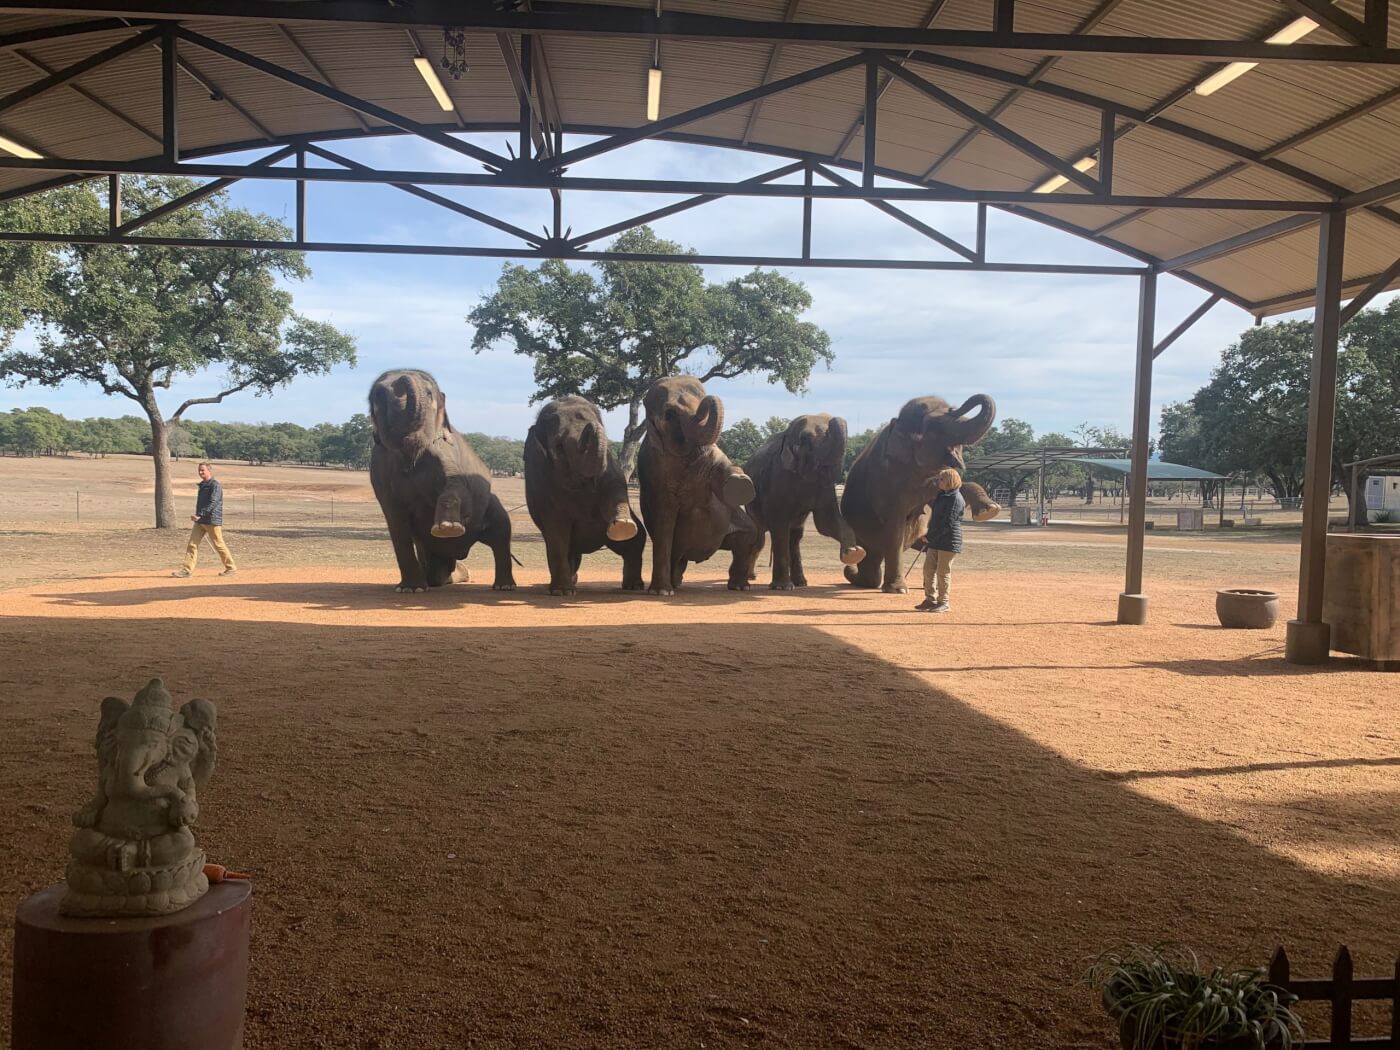 tai the elephant and others exploited at The Preserve in TX